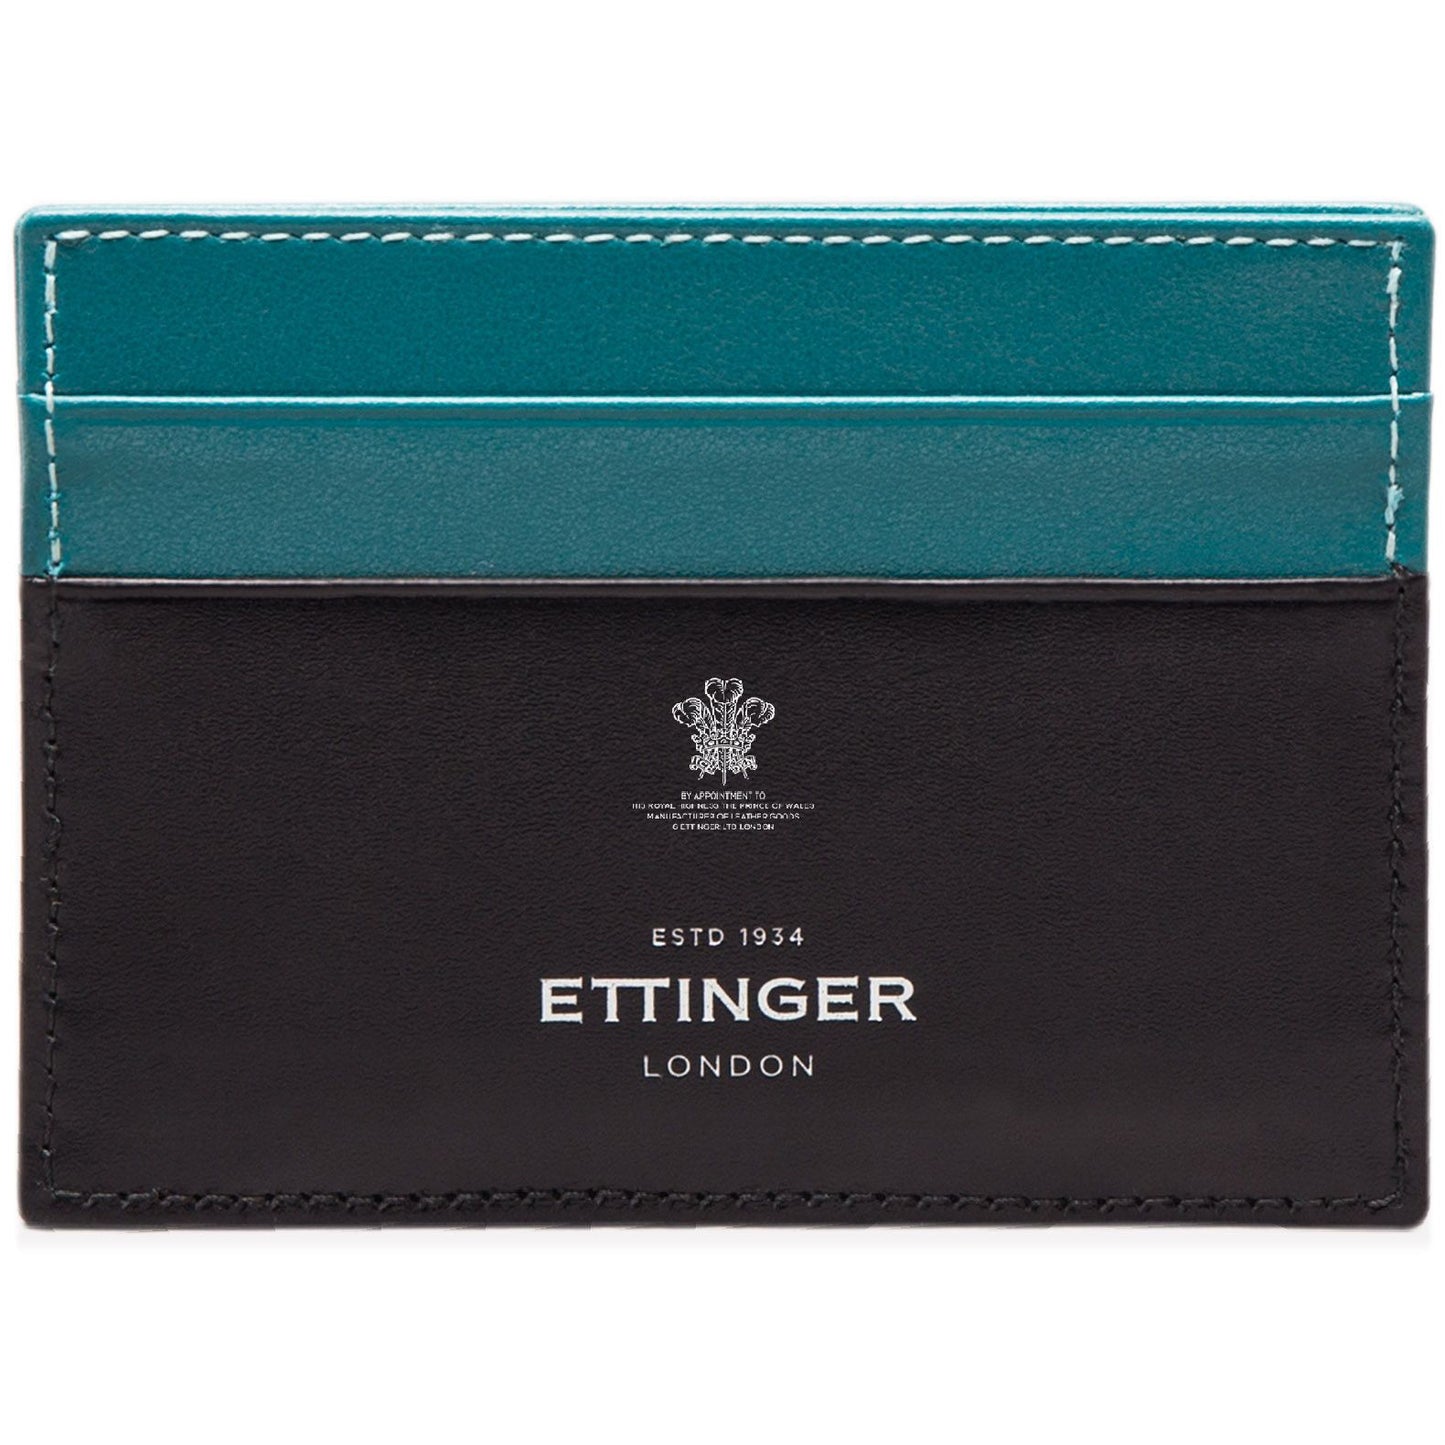 Ettinger Sterling Flat Credit Card Case, Turquoise and Black